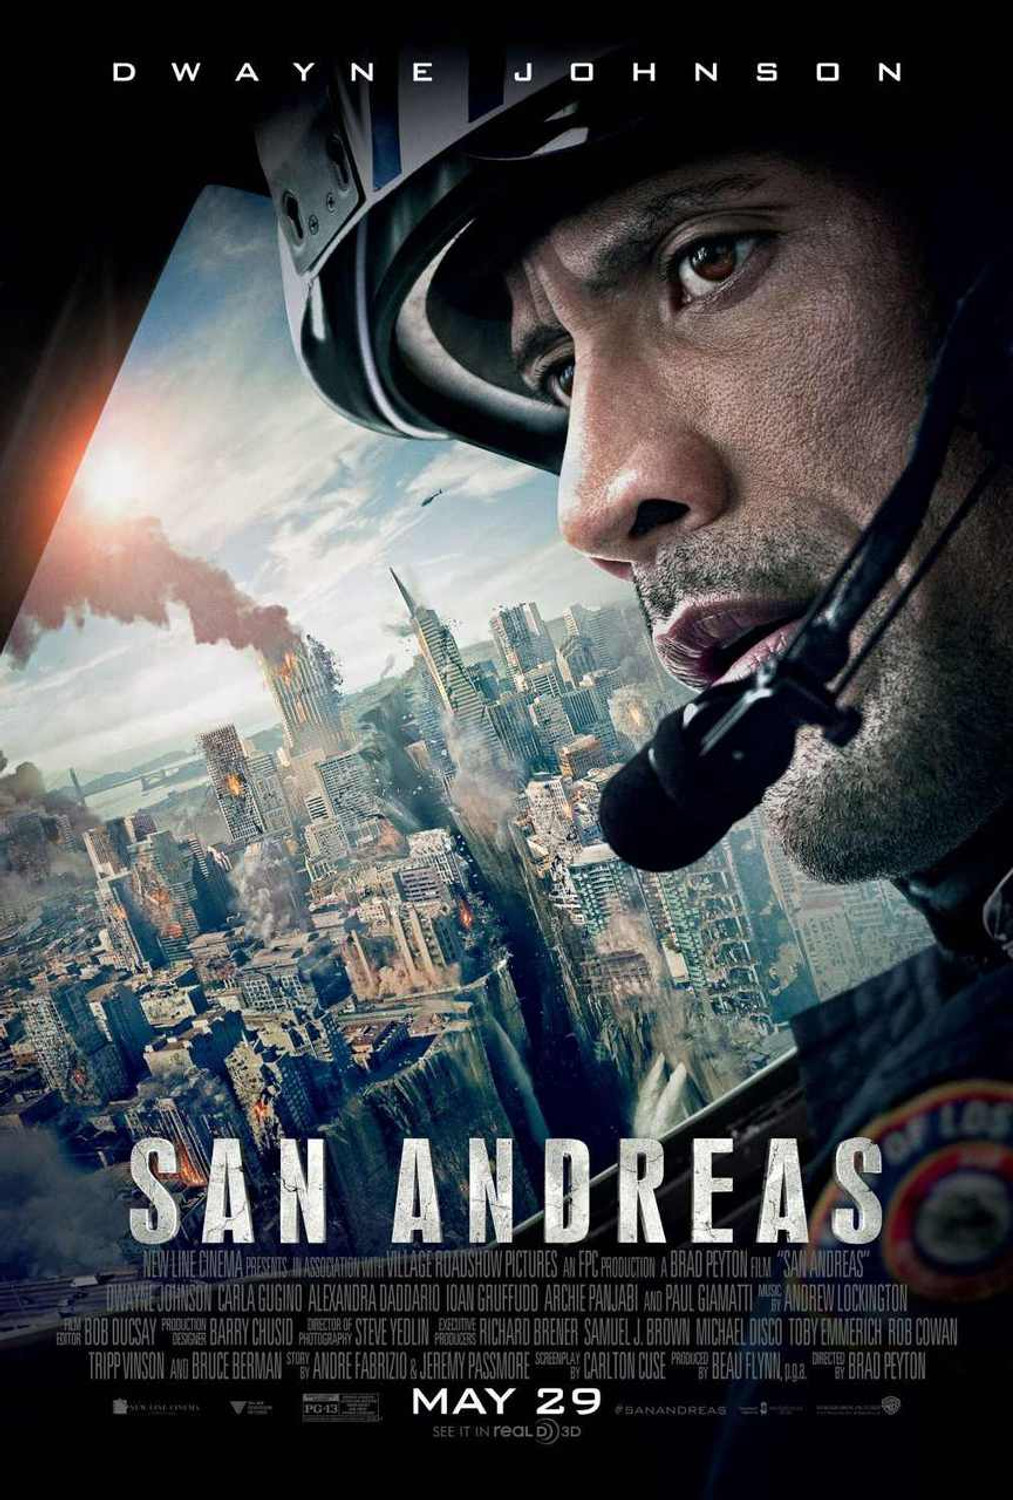 https://cdn11.bigcommerce.com/s-ydriczk/images/stencil/1500x1500/products/87399/88660/san_andreas_poster_regular_style_buy_original_movie_posters_at_starstills__38275.1435245972.jpg?c=2&imbypass=on